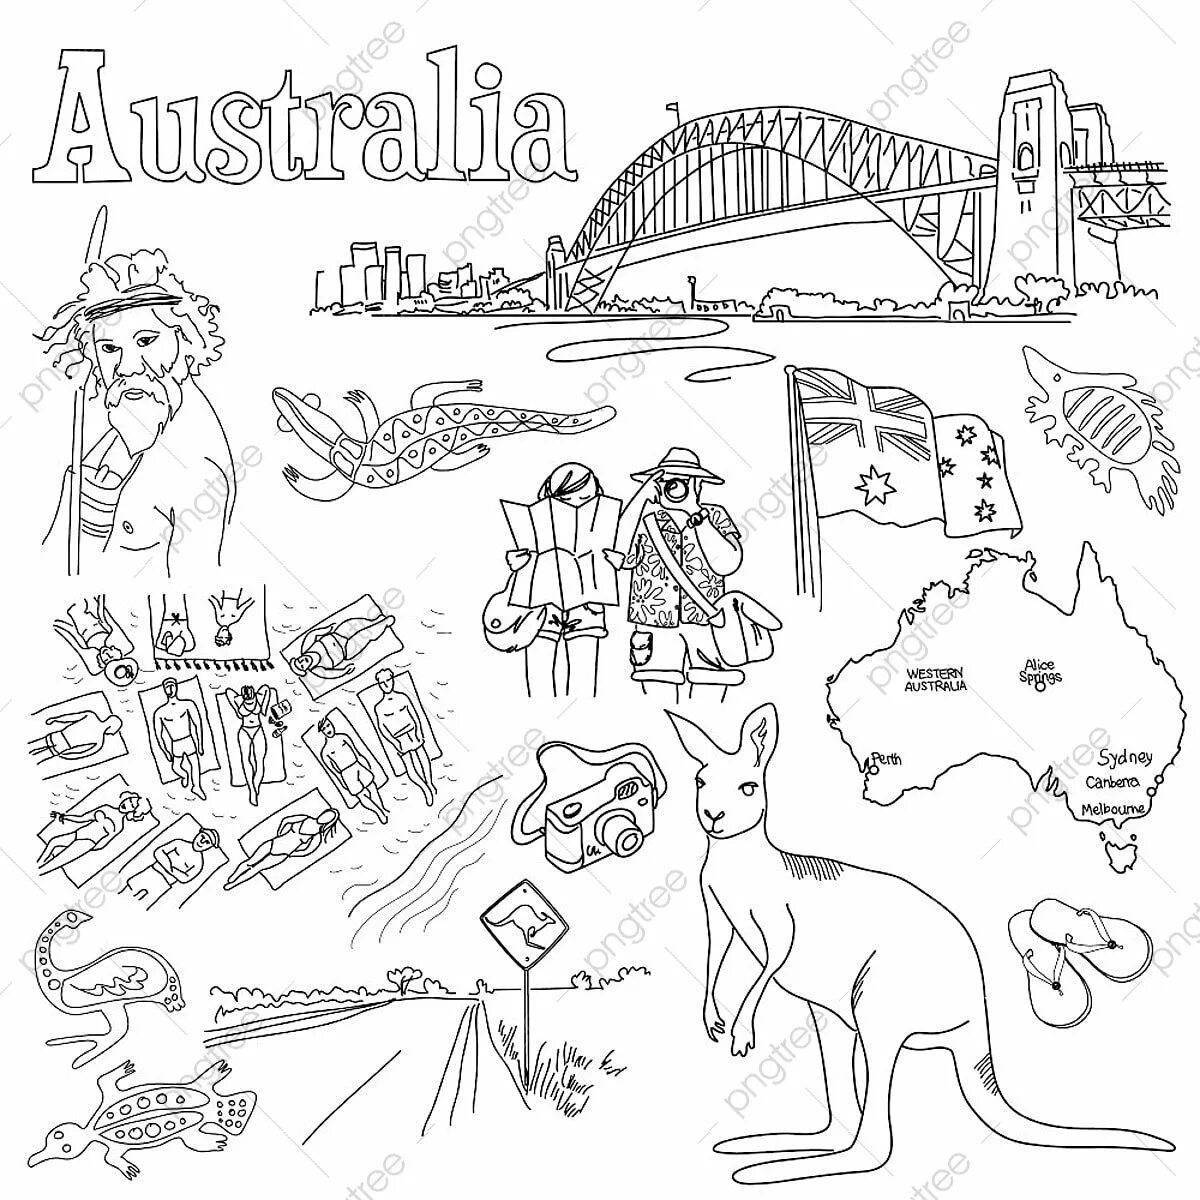 Australia Map Sample Coloring Page